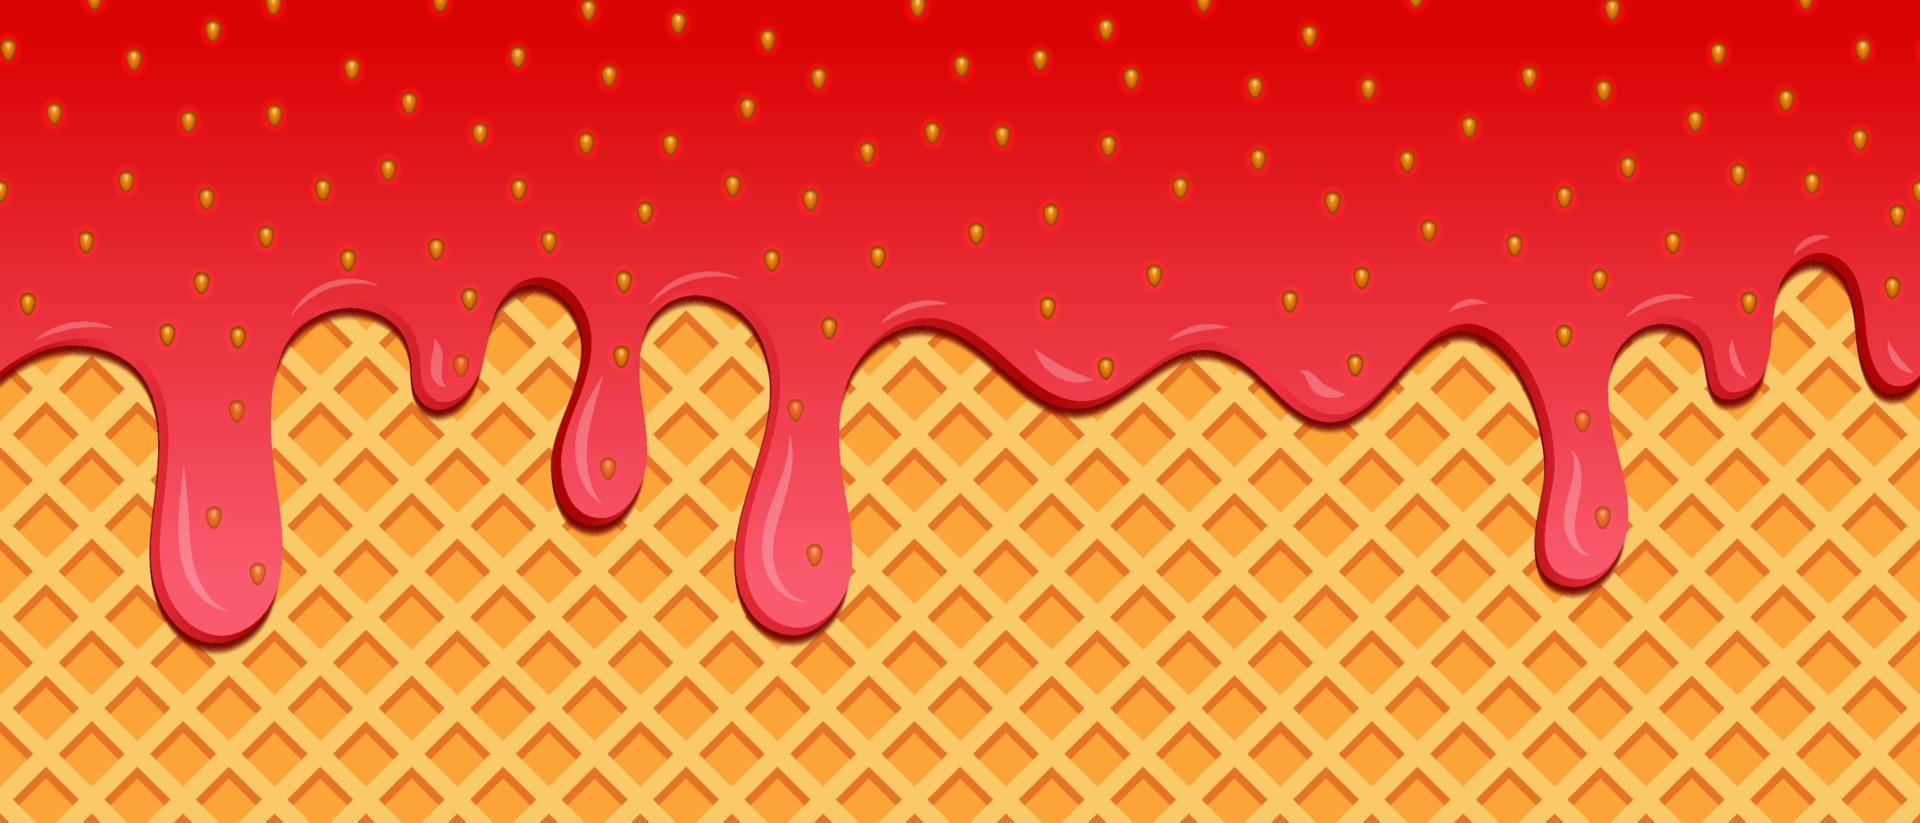 Strawberry ice cream melted on waffle background. Cream melted on waffle background. Sweet ice cream flowing down on cone vector